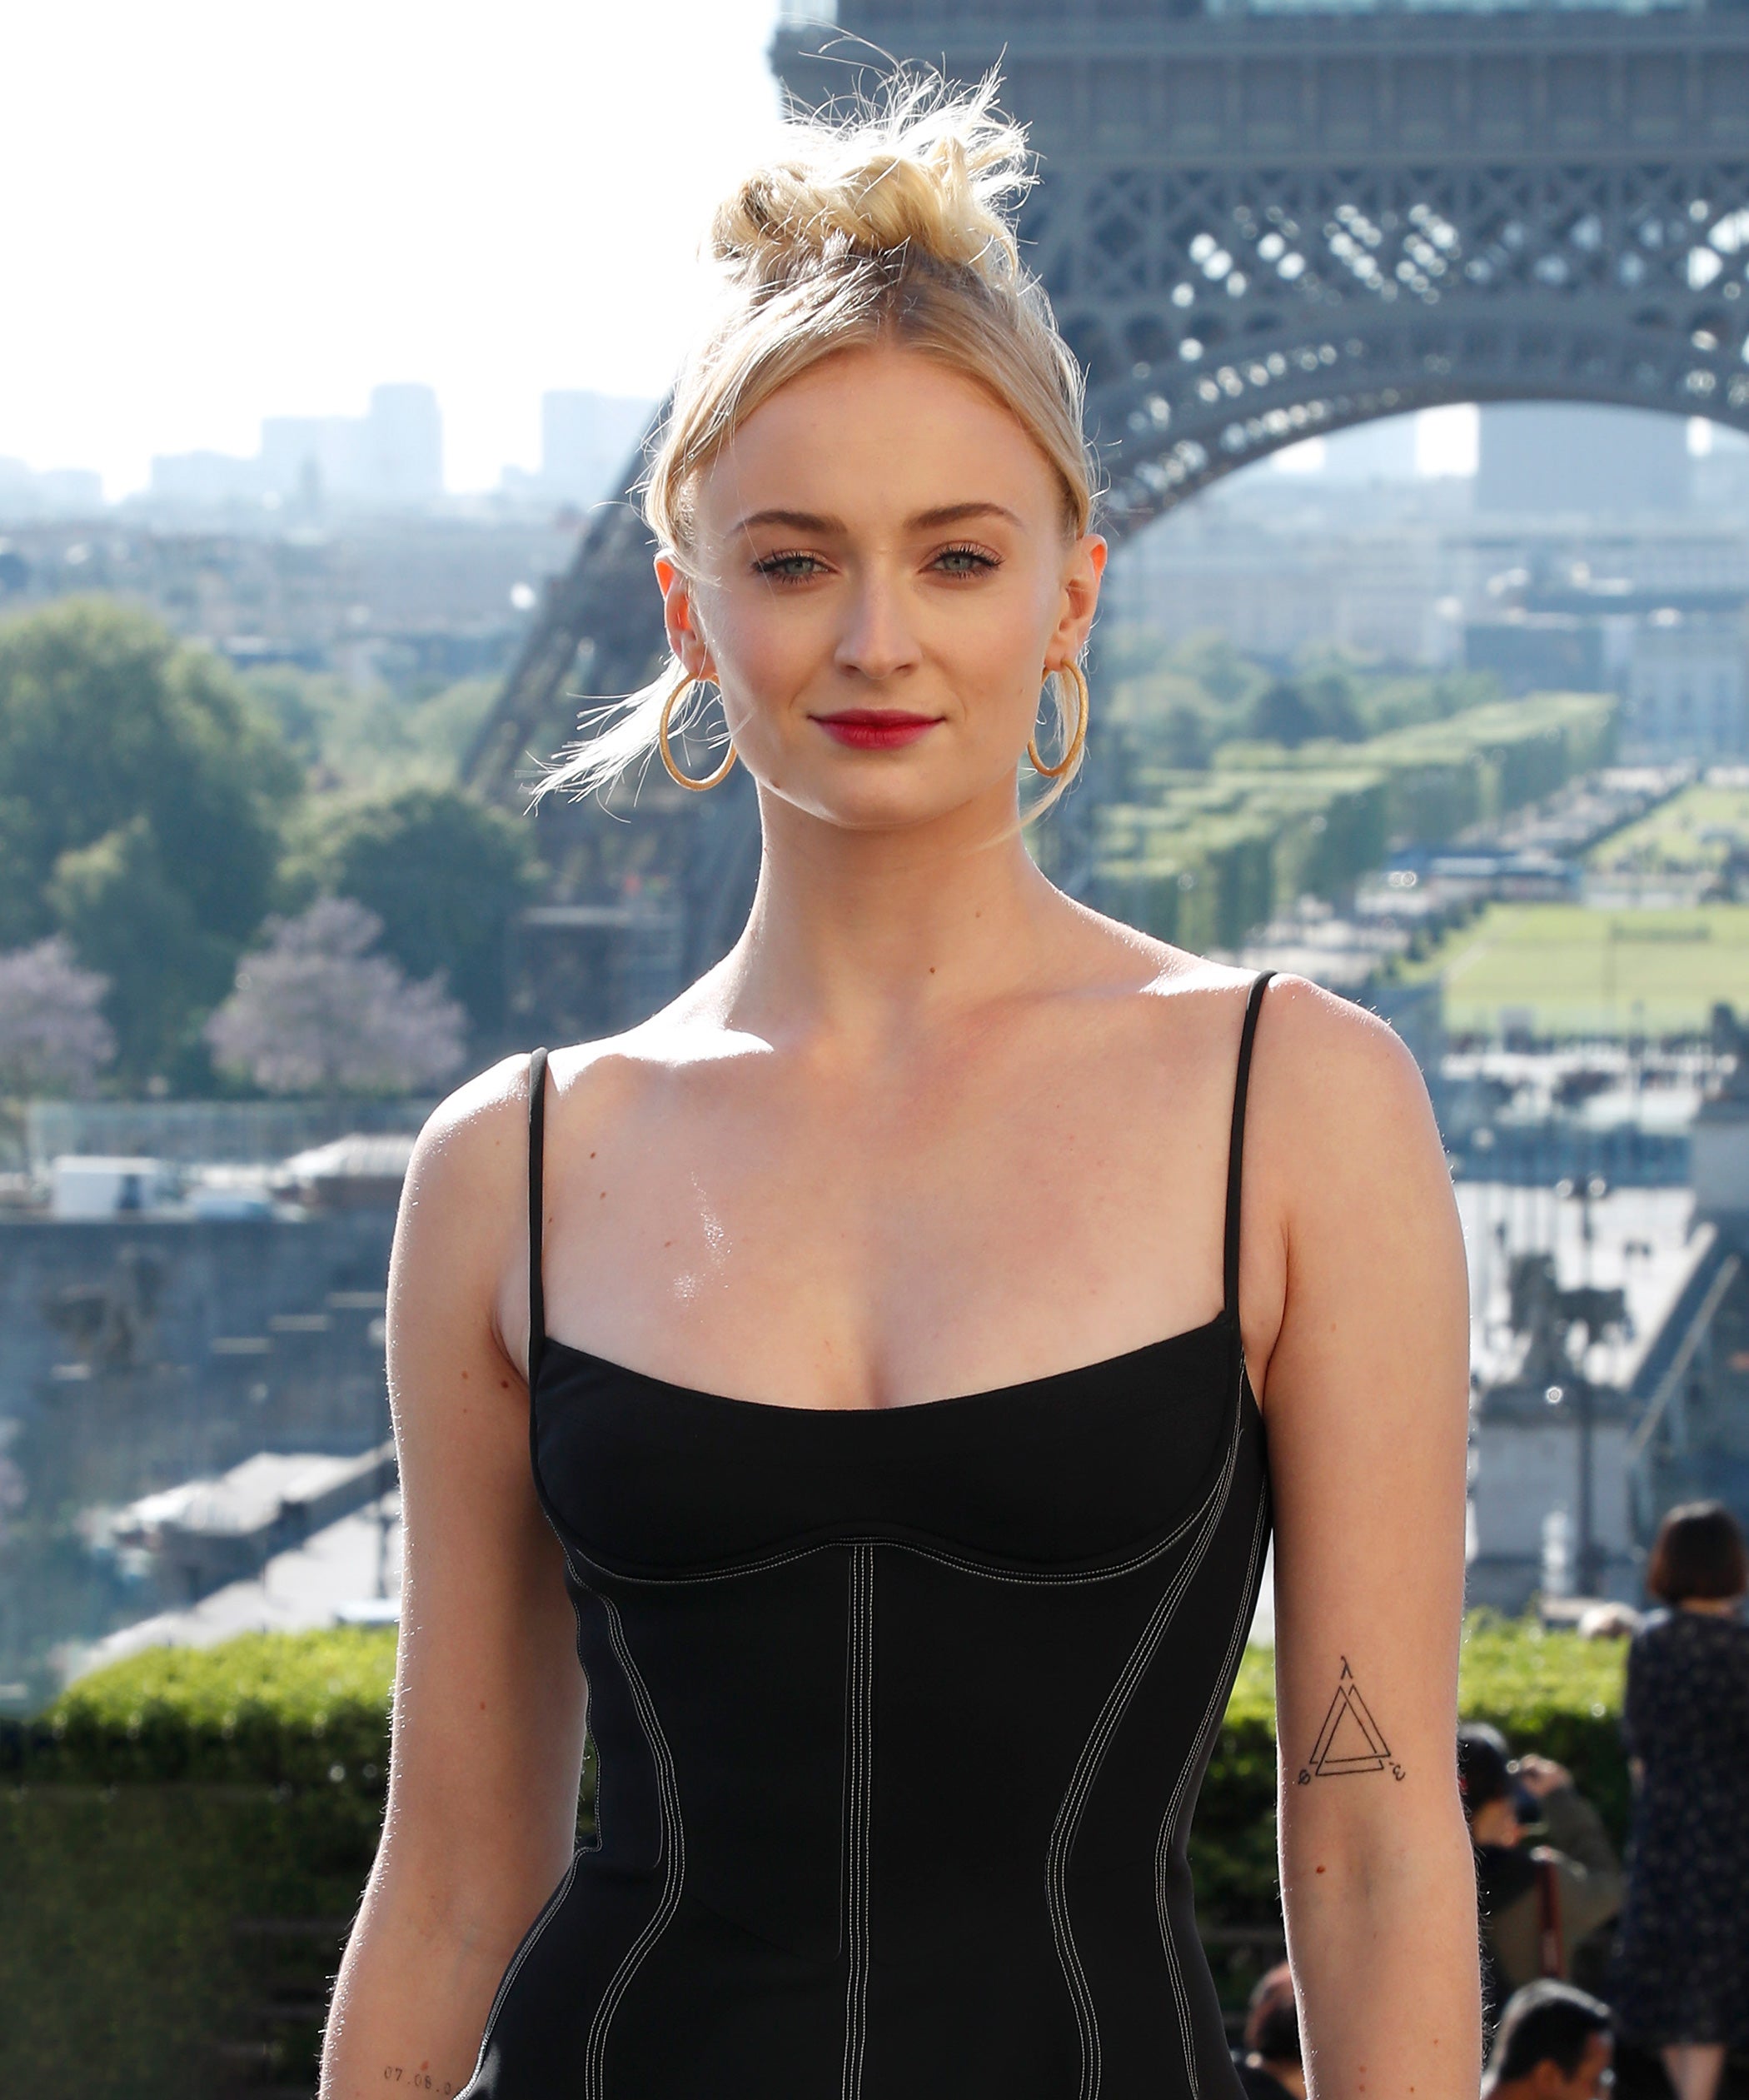 Sophie Turner Wearing Louis Vuitton Slippers Outside Is A Serious